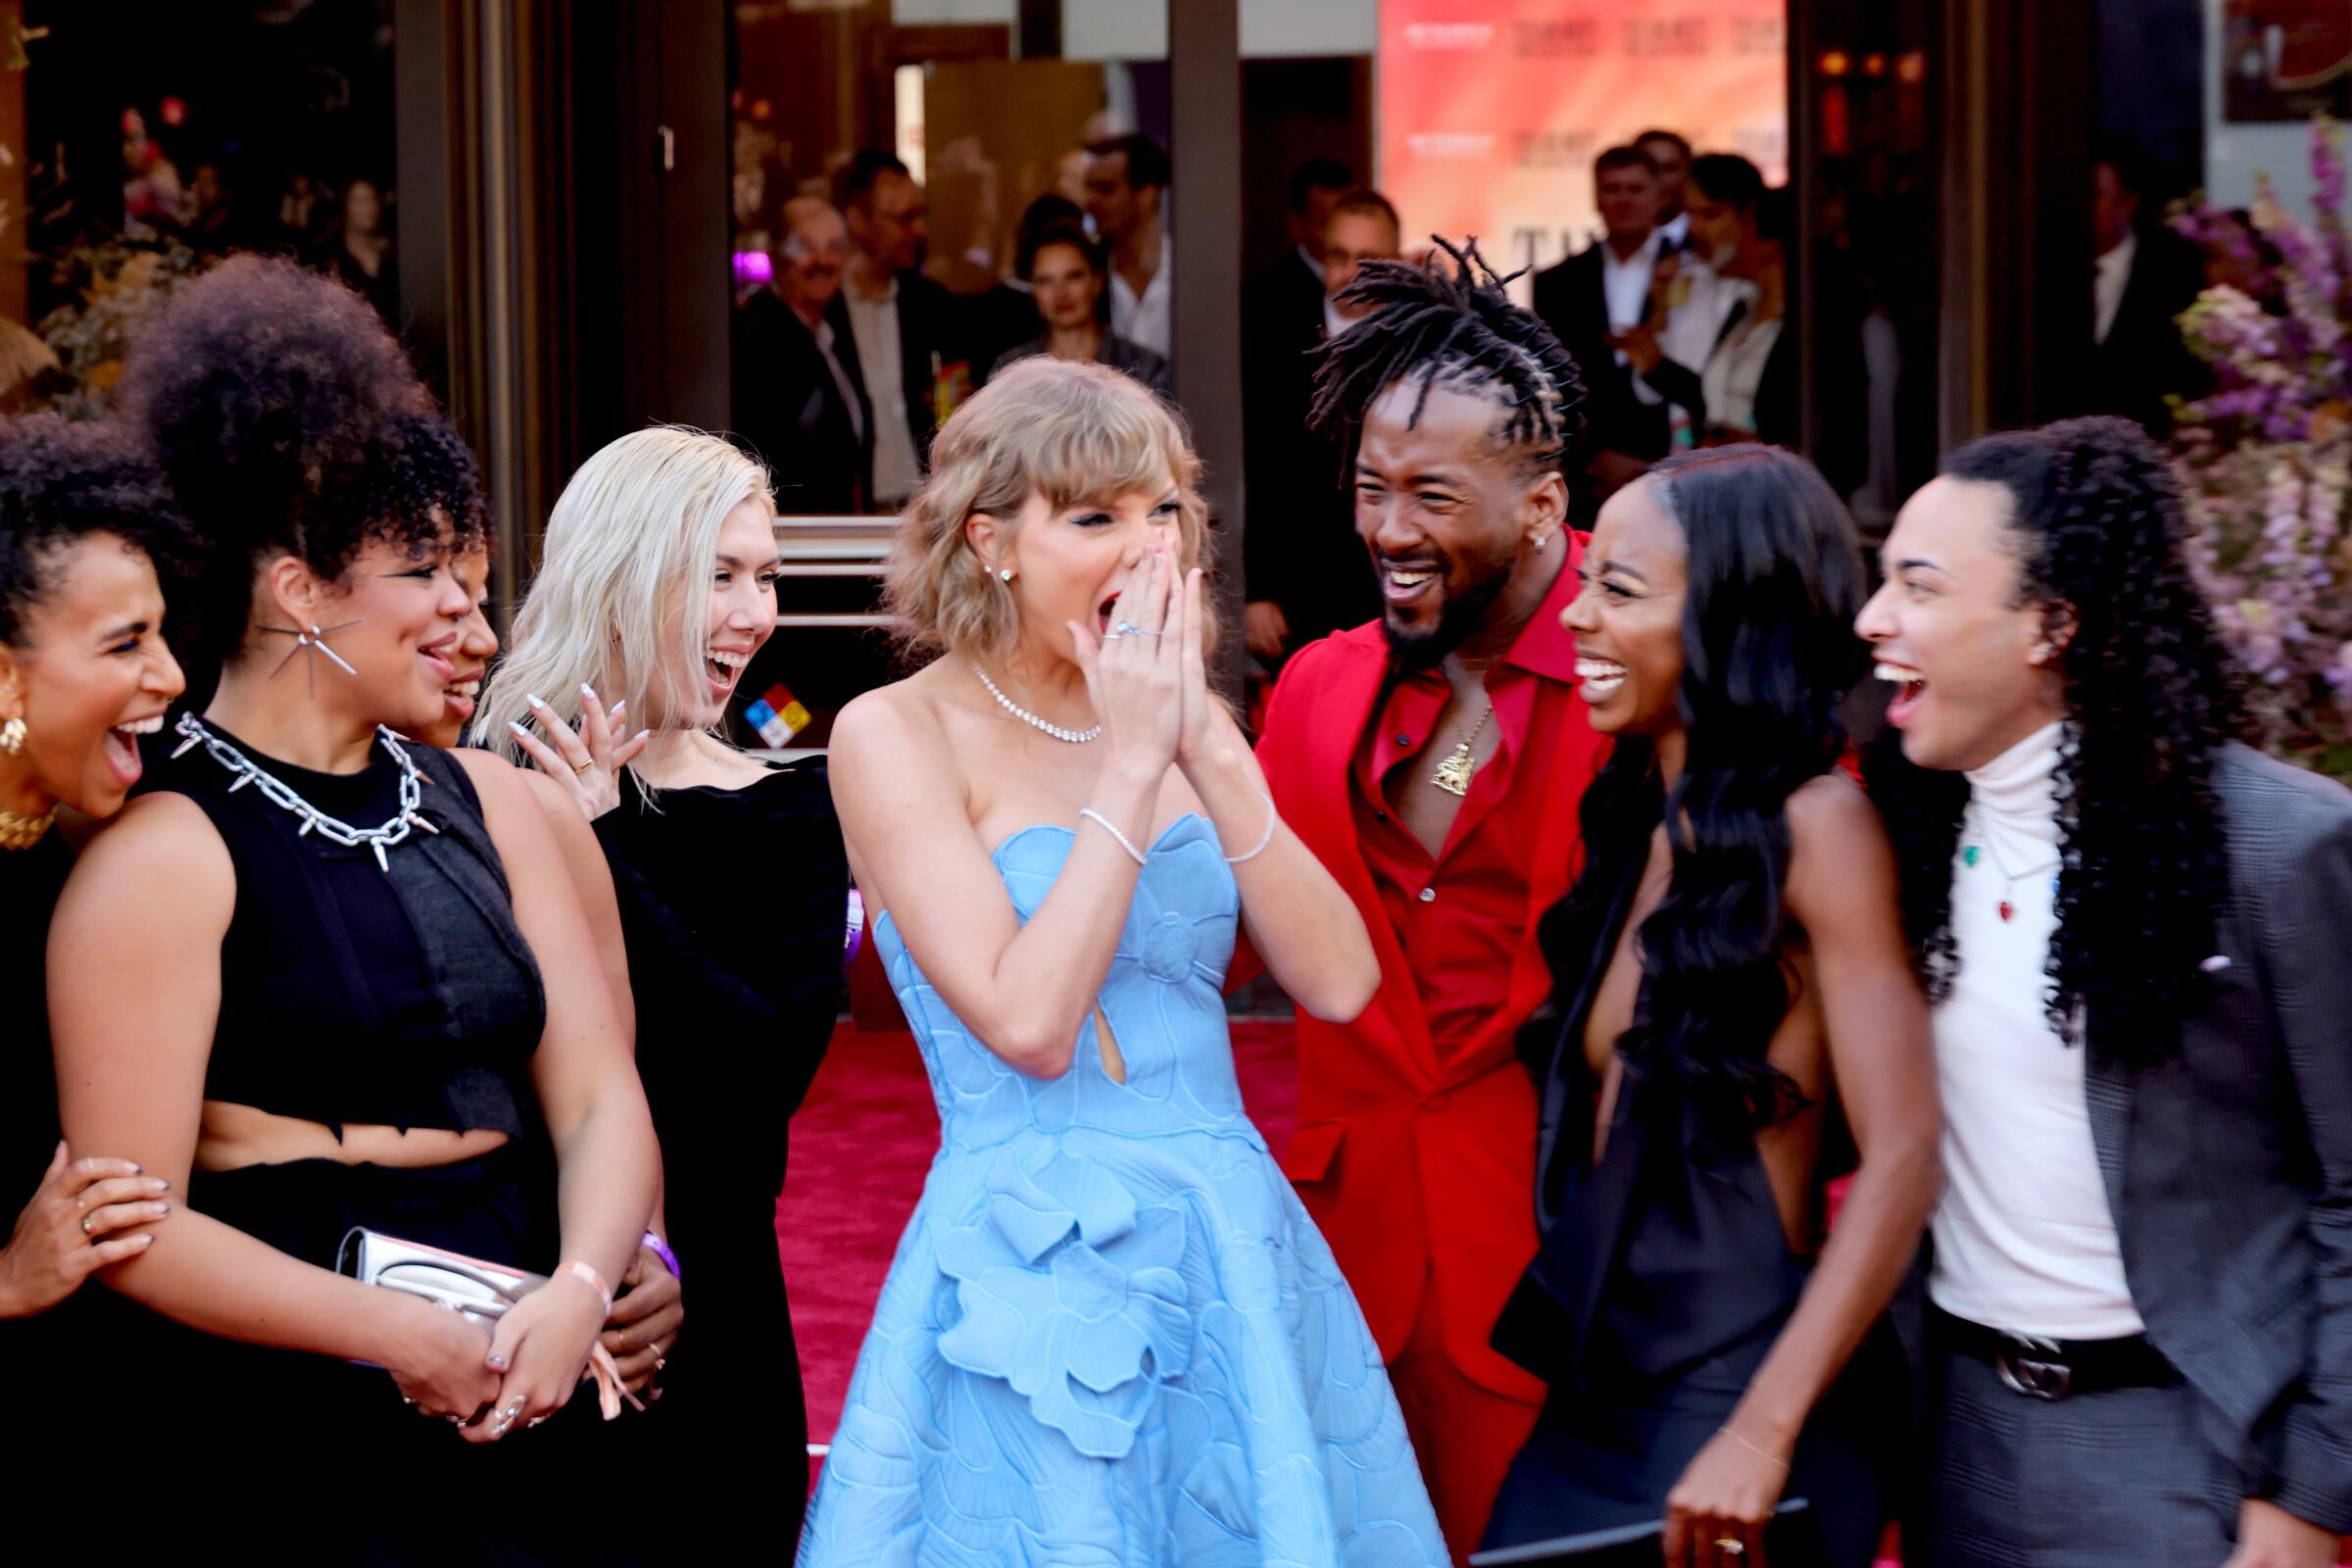 Taylor Swift in a blue dress on a red carpet surrounded by several people.